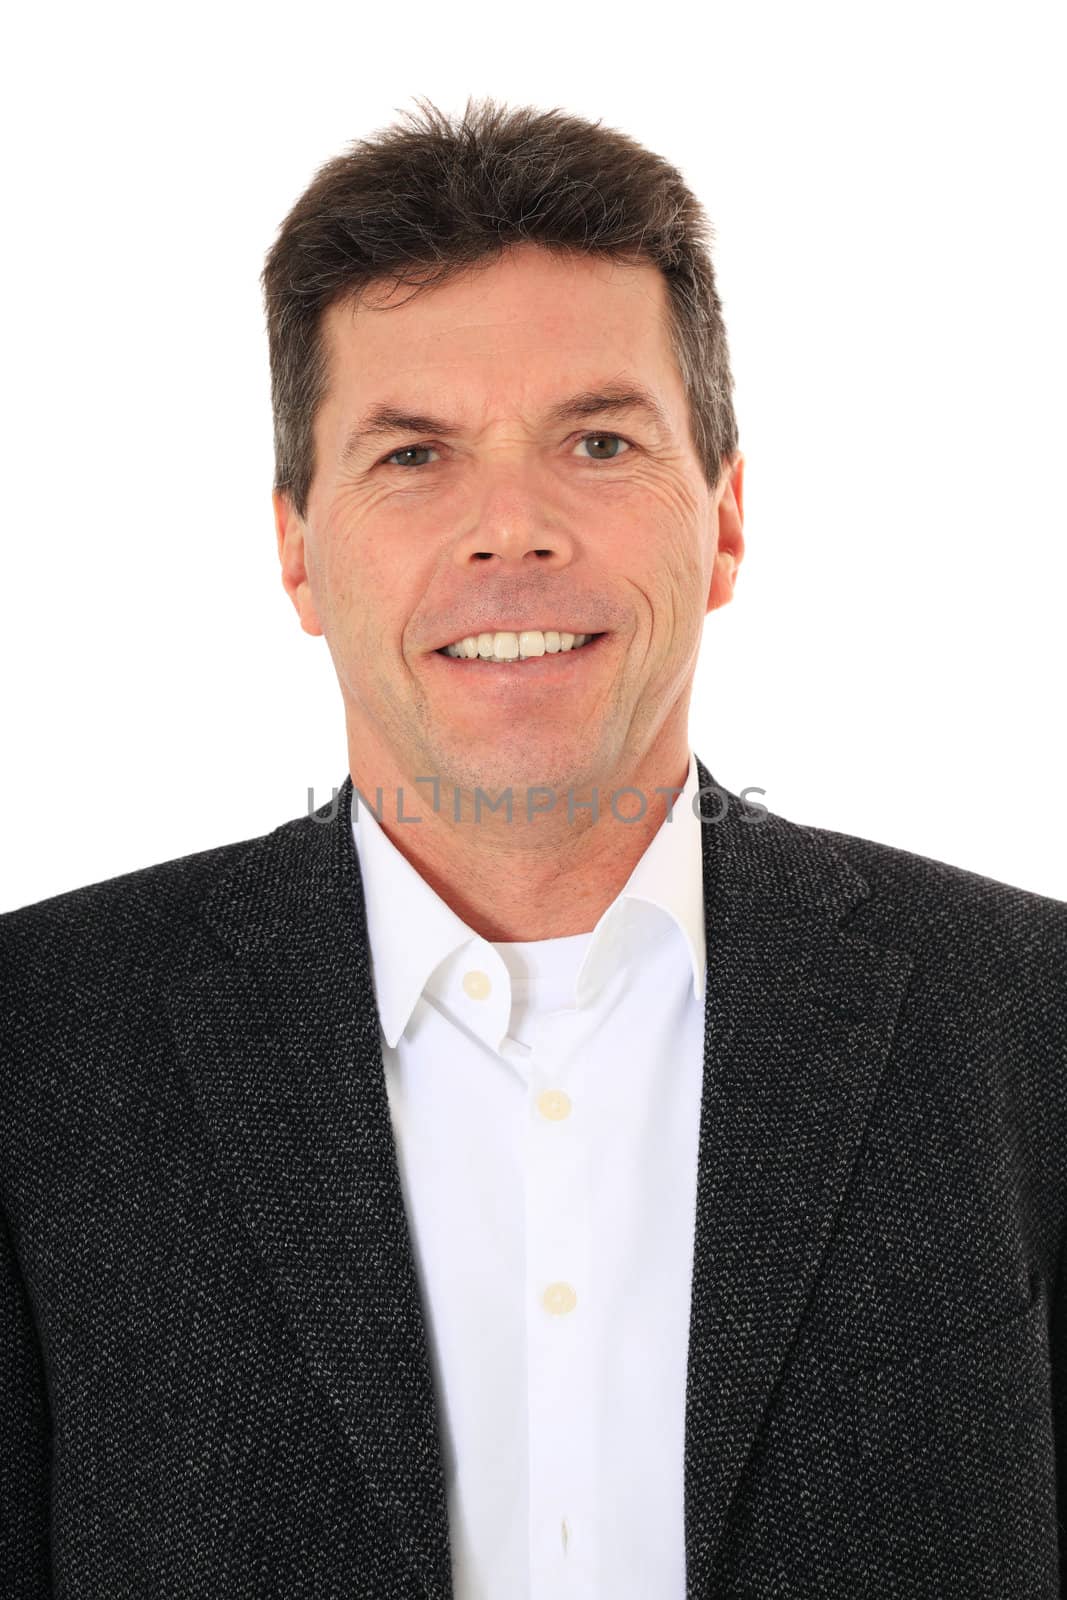 Attractive middle-aged man. All on white background.